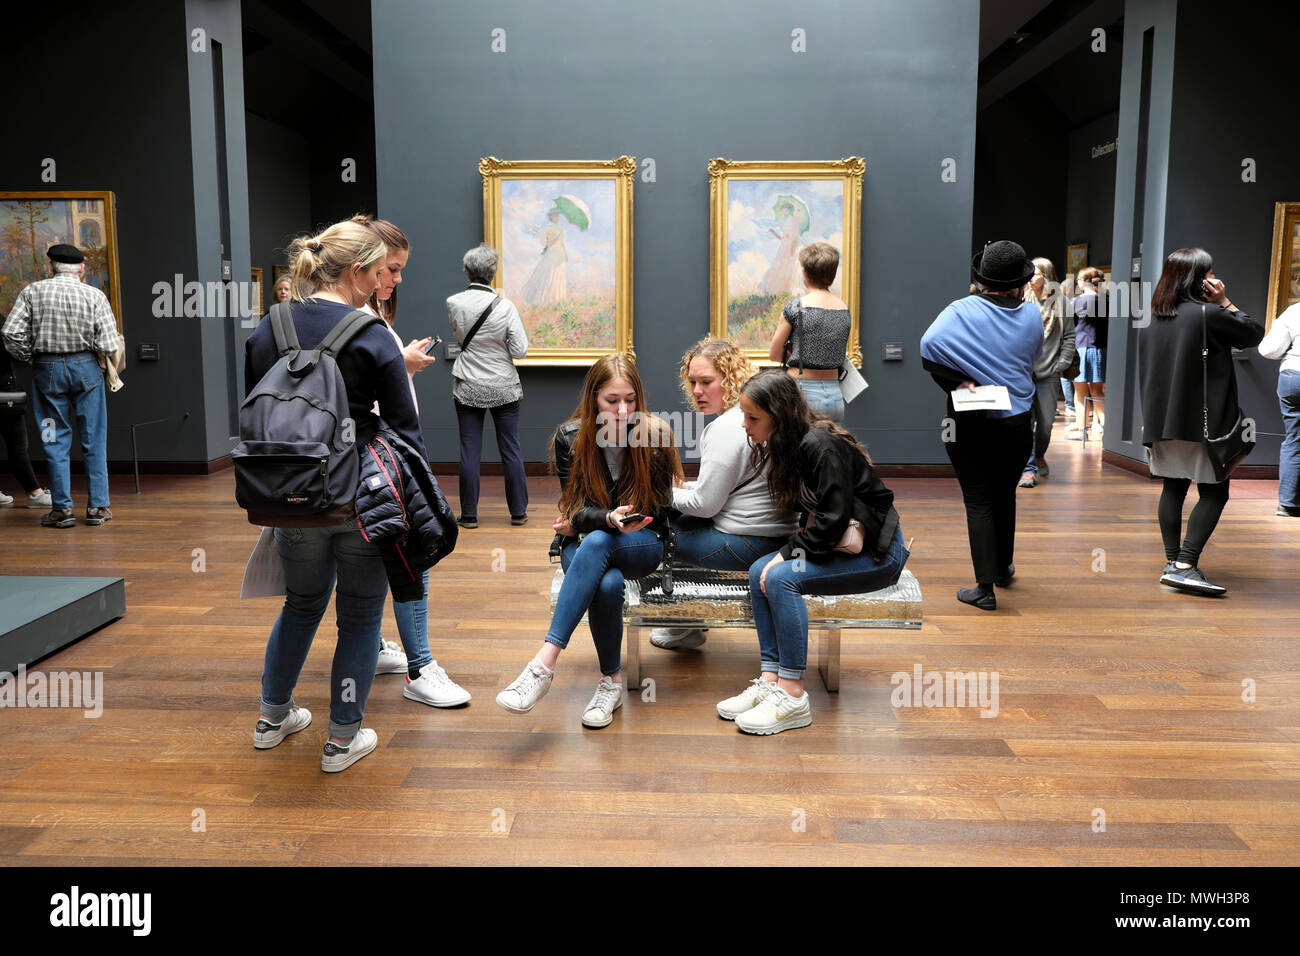 Young women sitting on bench talking & people visiting the Musée d'Orsay  art gallery & Monet The Woman with a Parasol 1886 Paris France KATHY DEWITT  Stock Photo - Alamy